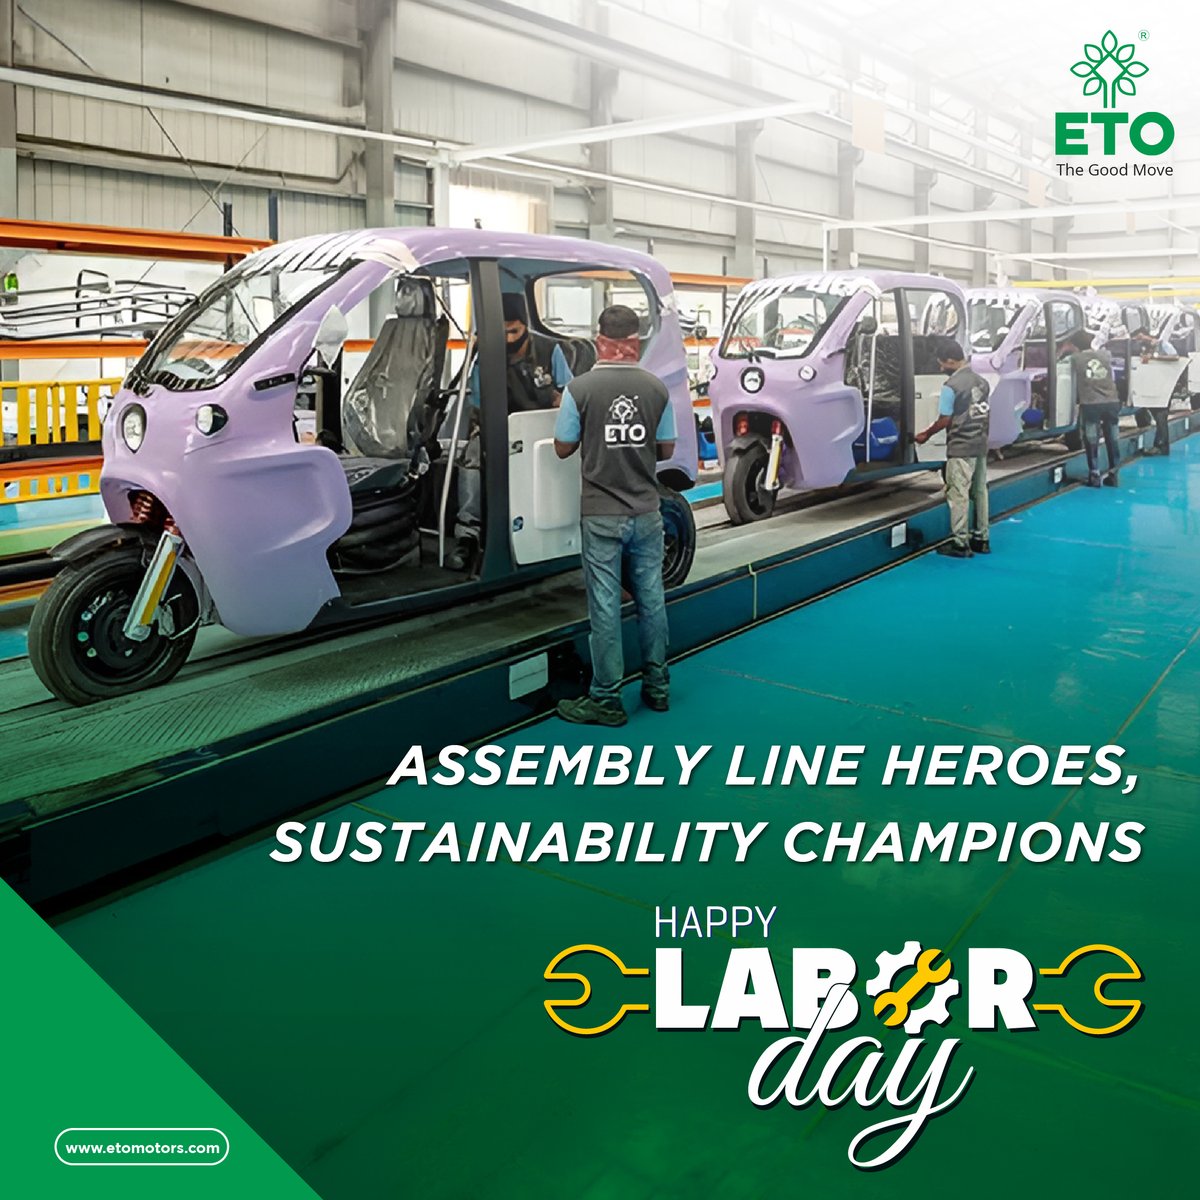 Today, we salute the dedication and hard work of our assembly line team. Your commitment to quality and sustainability fuels our mission every day. Thank you for being the backbone of ETO Motors.

#LabourDay #Dedication #HardWork #Sustainability #Appreciation #ThankYou #ETOmotors